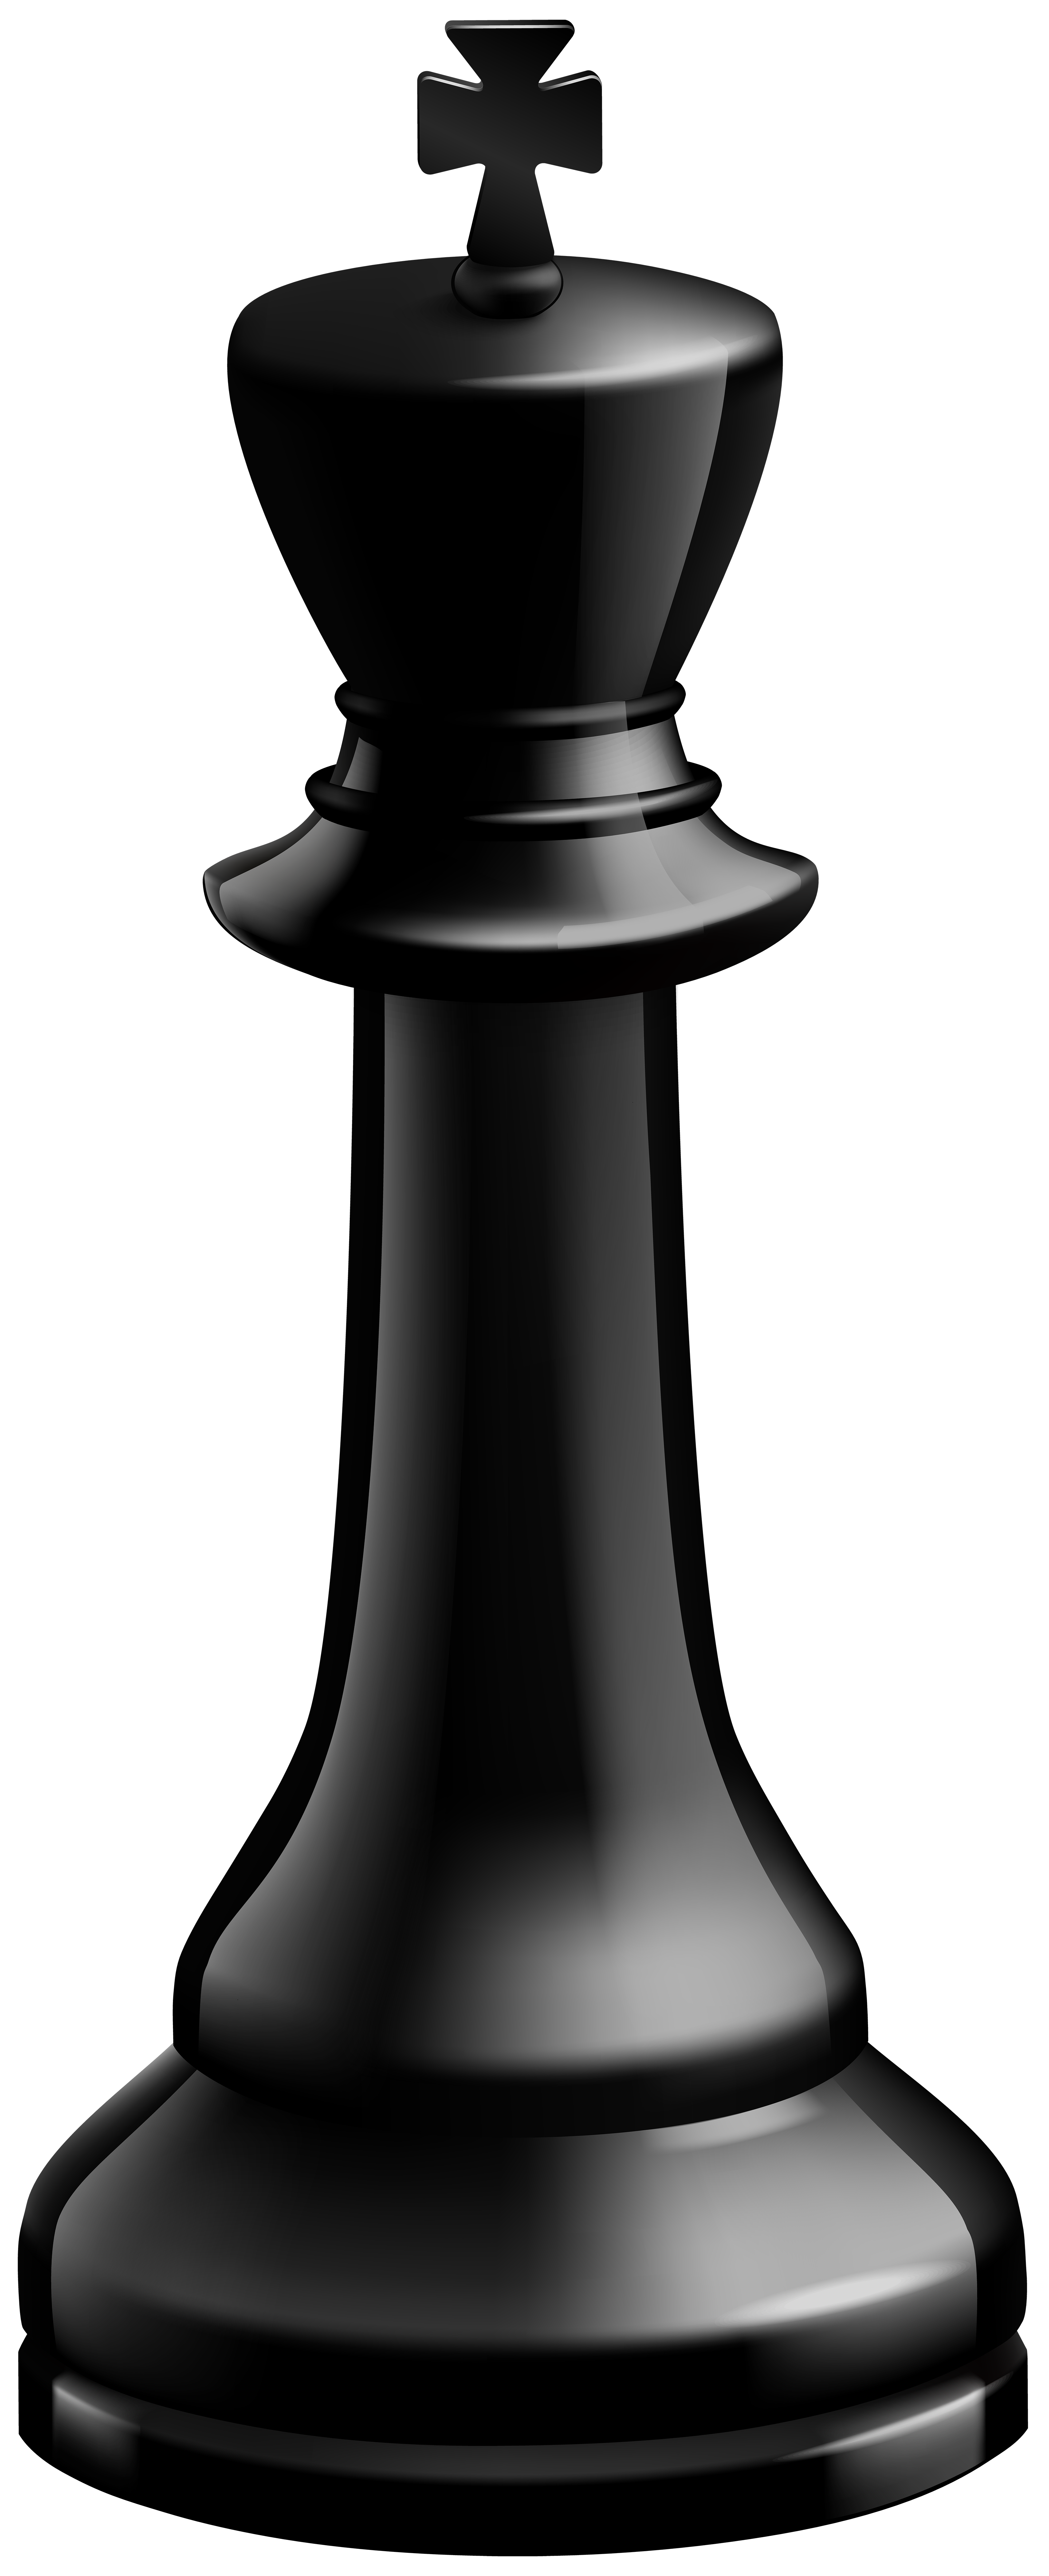 king chess pieces